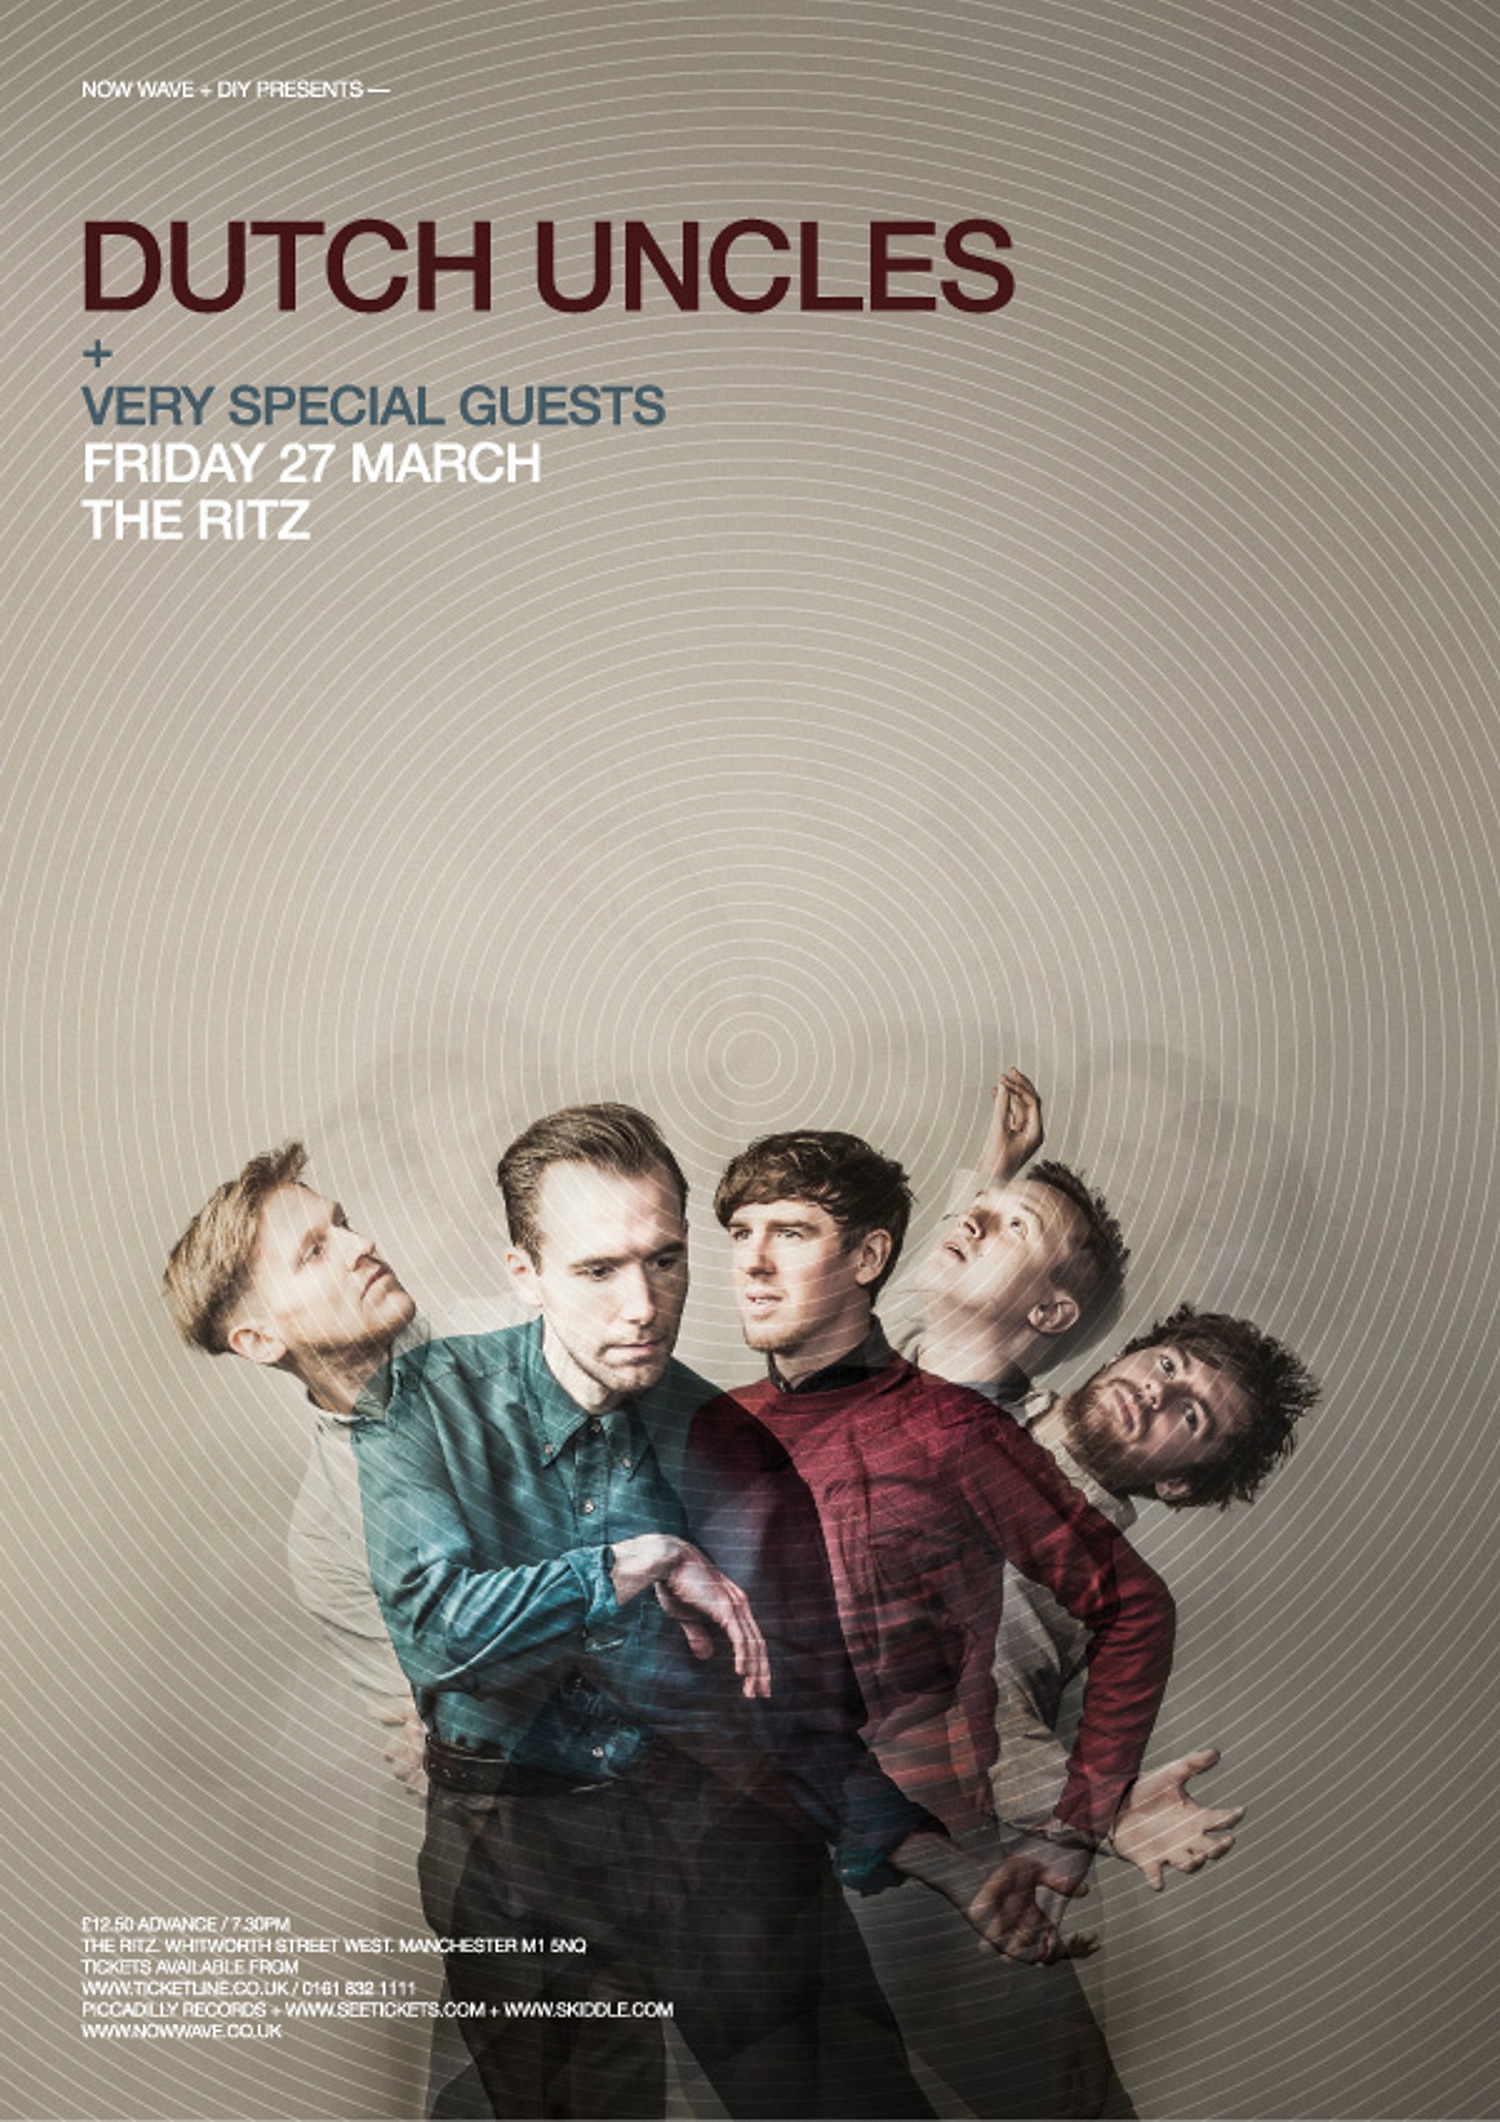 Dutch Uncles to headline DIY + Now Wave Presents show in Manchester